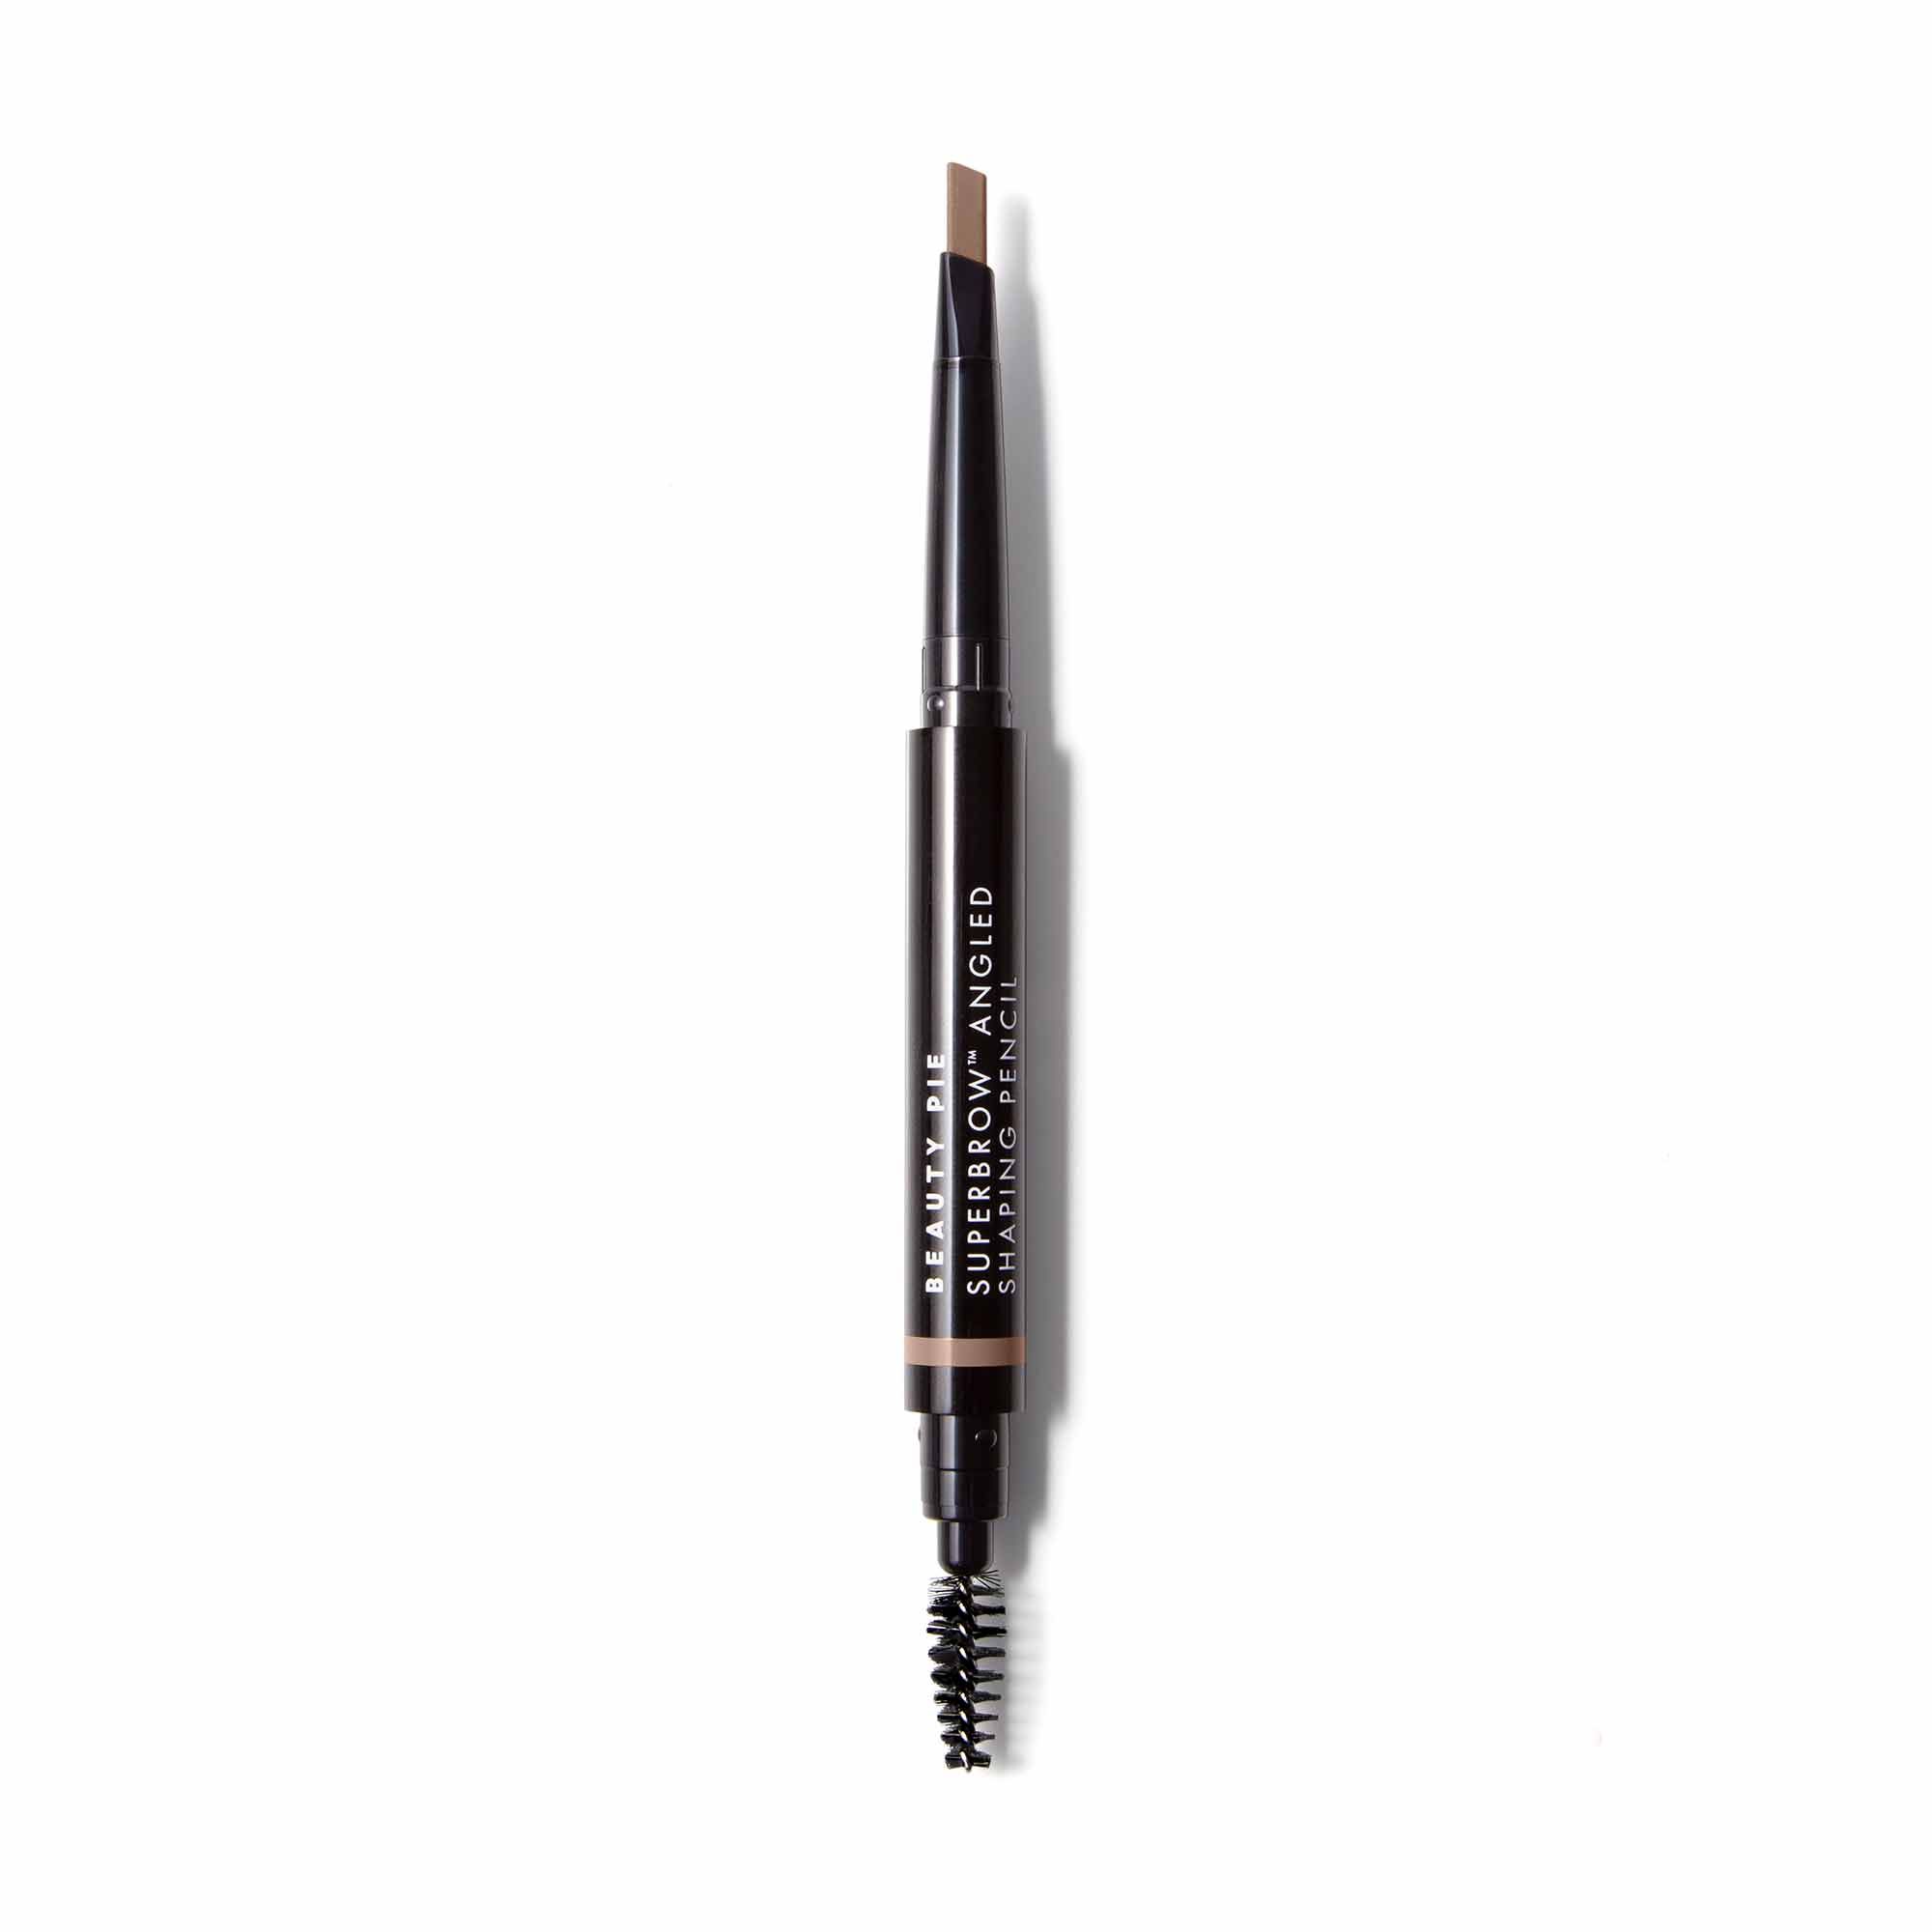 Superbrow™ Angled Shaping Pencil | Beauty Pie (UK)